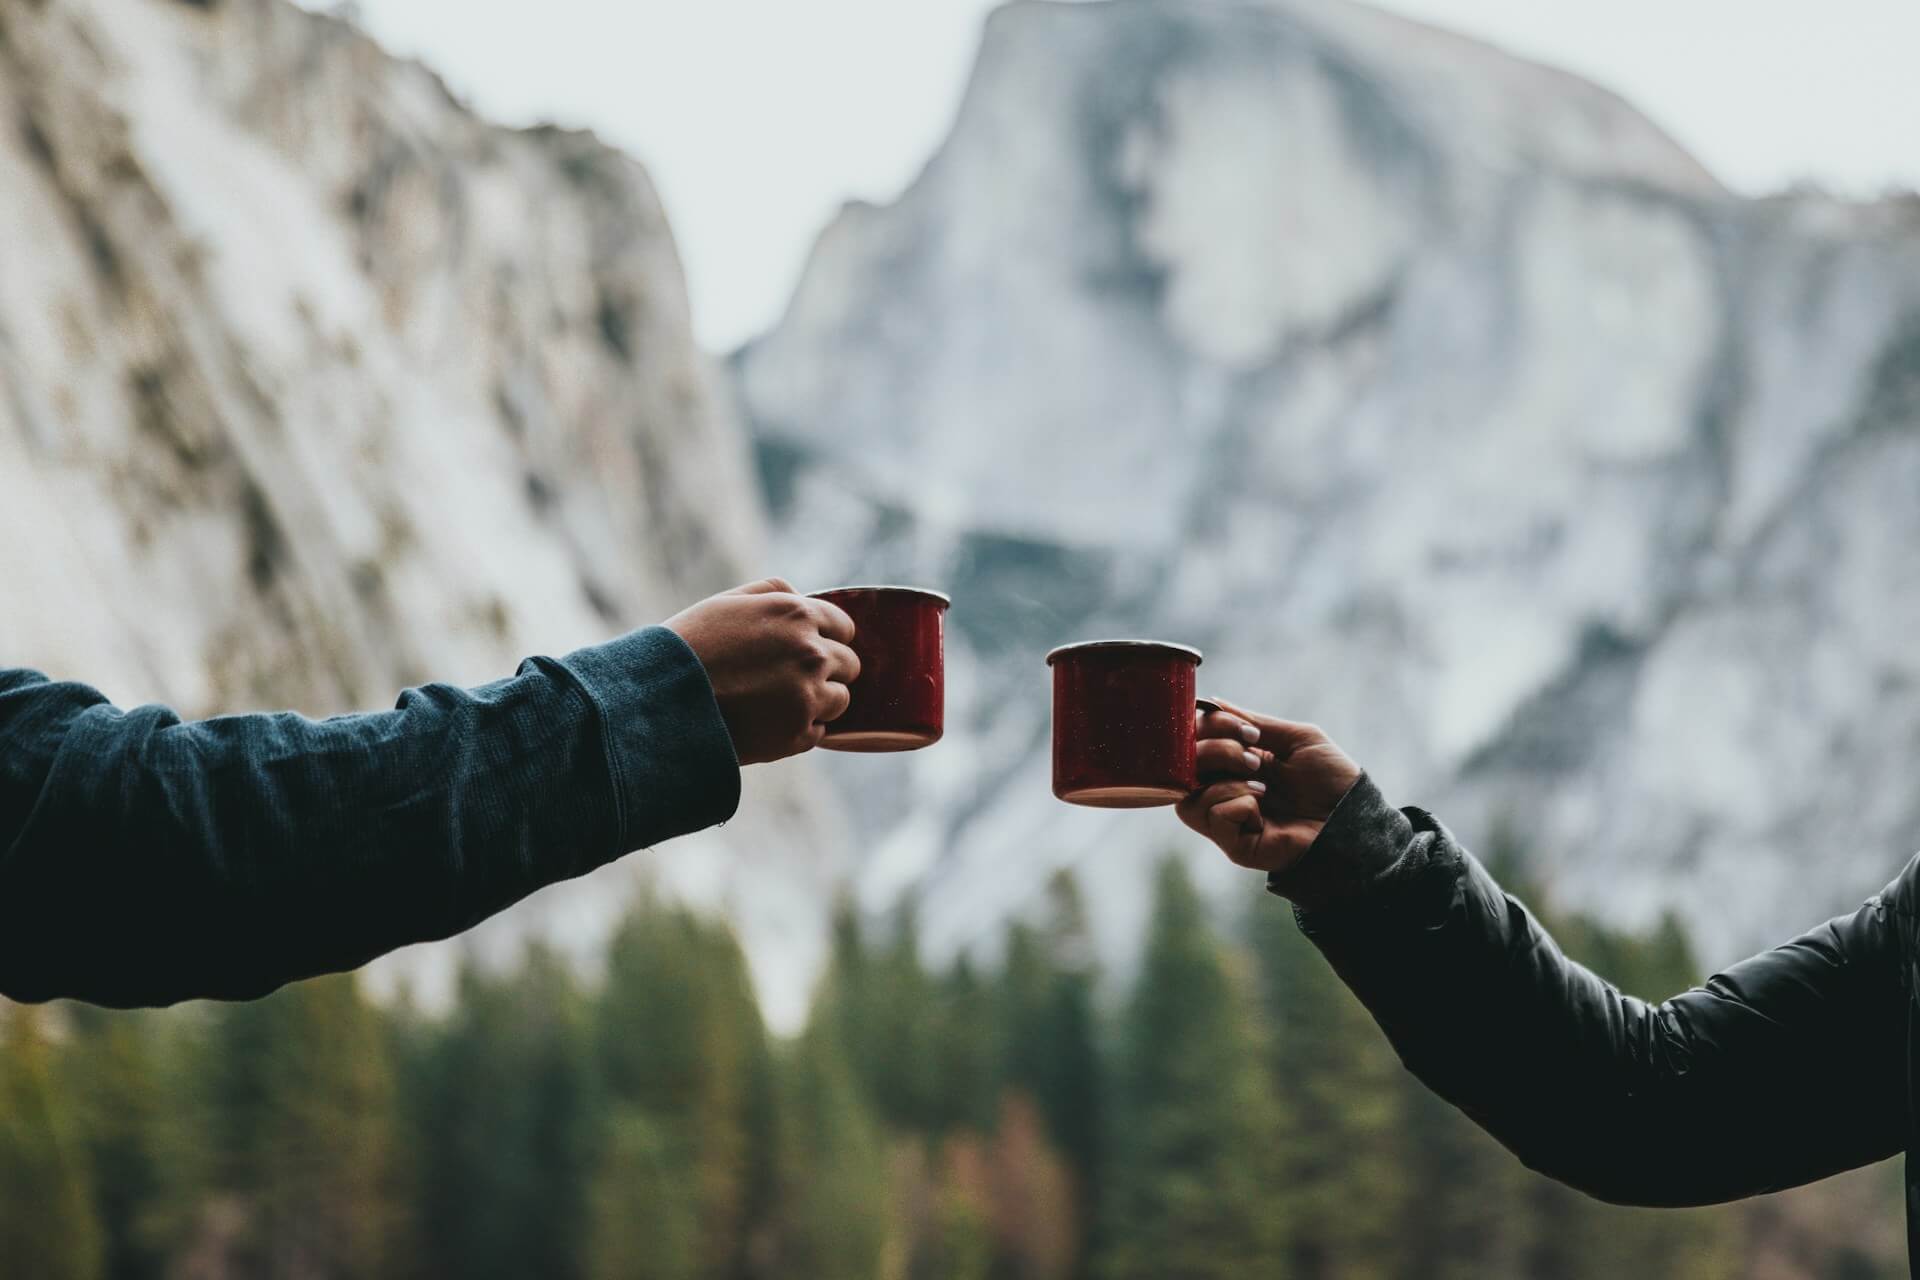 Image shows two different arms raised to clink mugs of hot coffee somewhere outside with mountains.